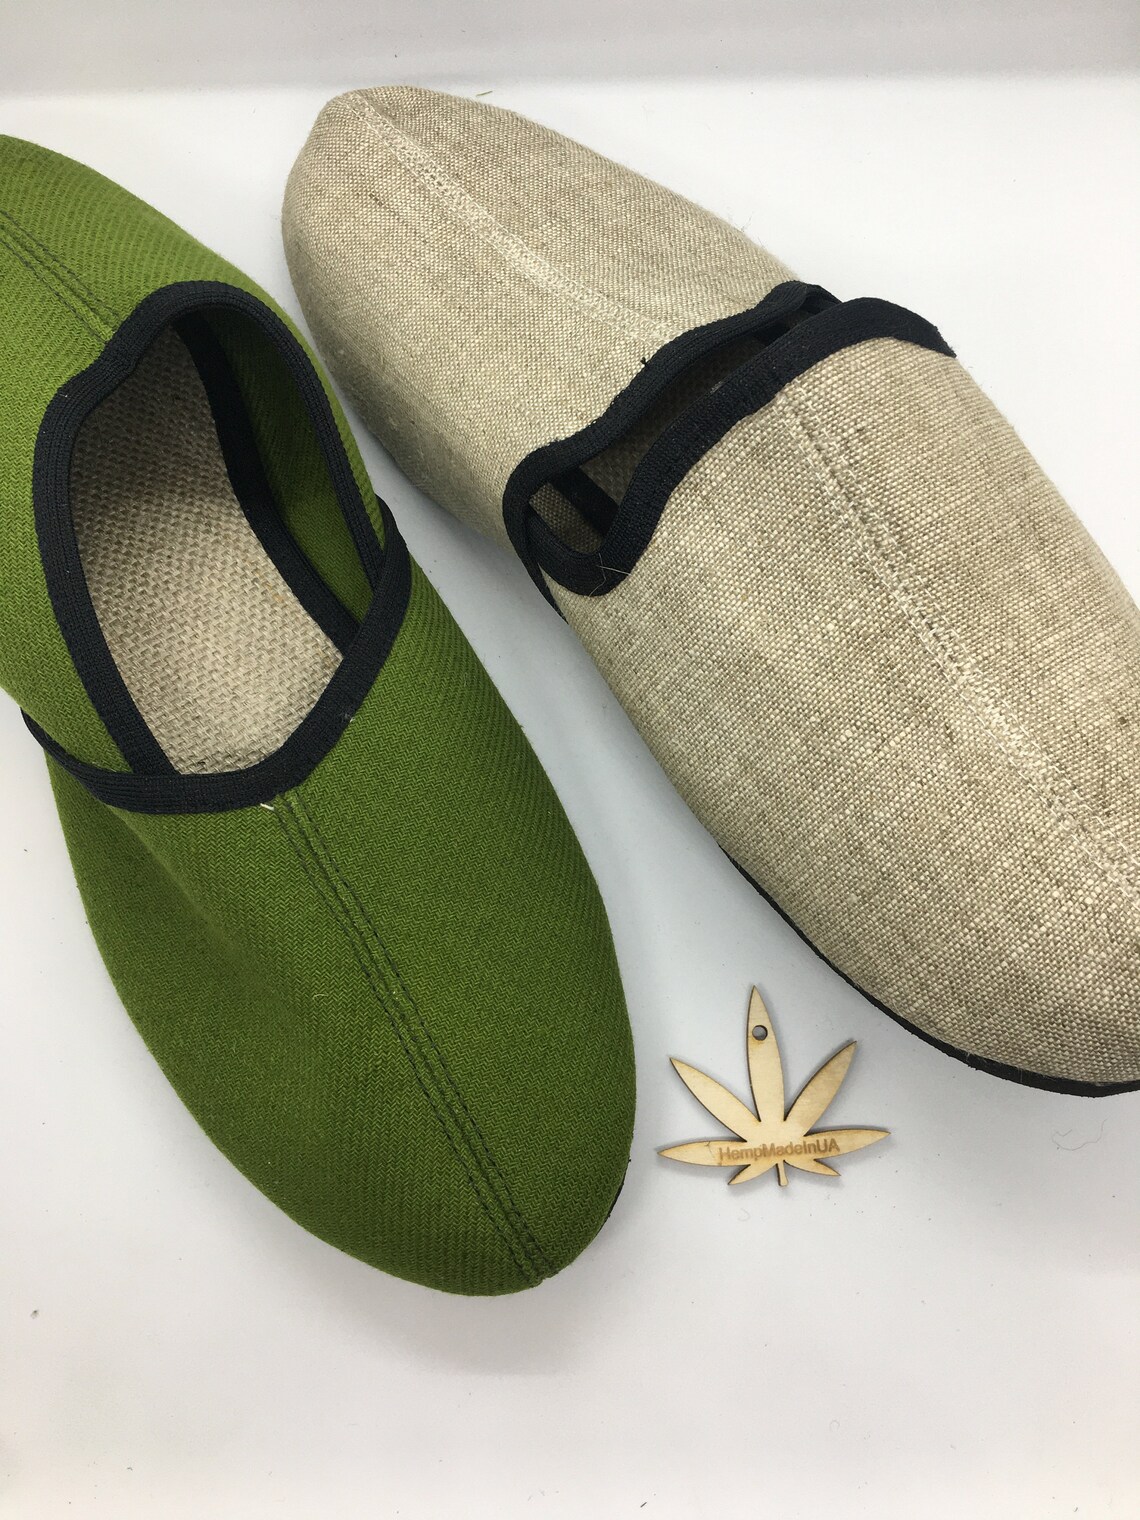 Mens hemp slippers with hemp insole Set of two pairs Grey and | Etsy